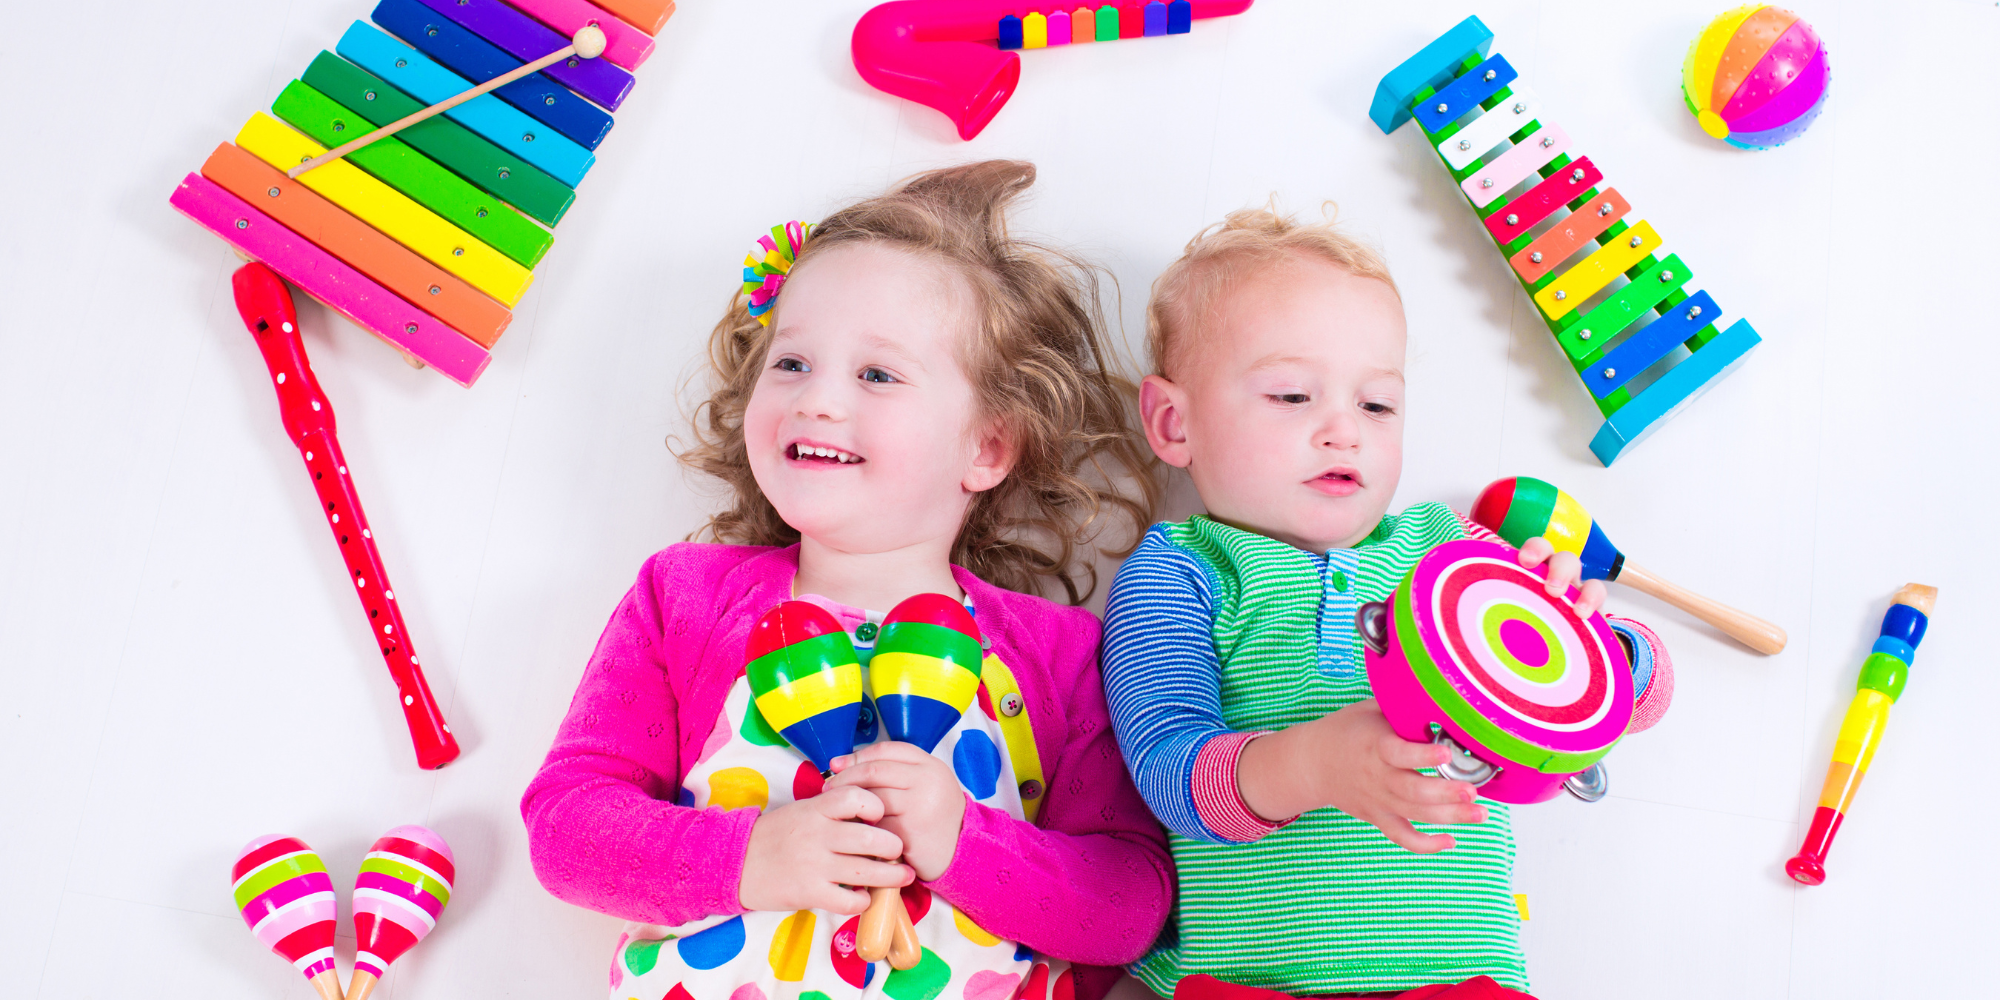 Photograph of 2 light-skinned toddlers lying on a white background surrounded by colorful musical instruments